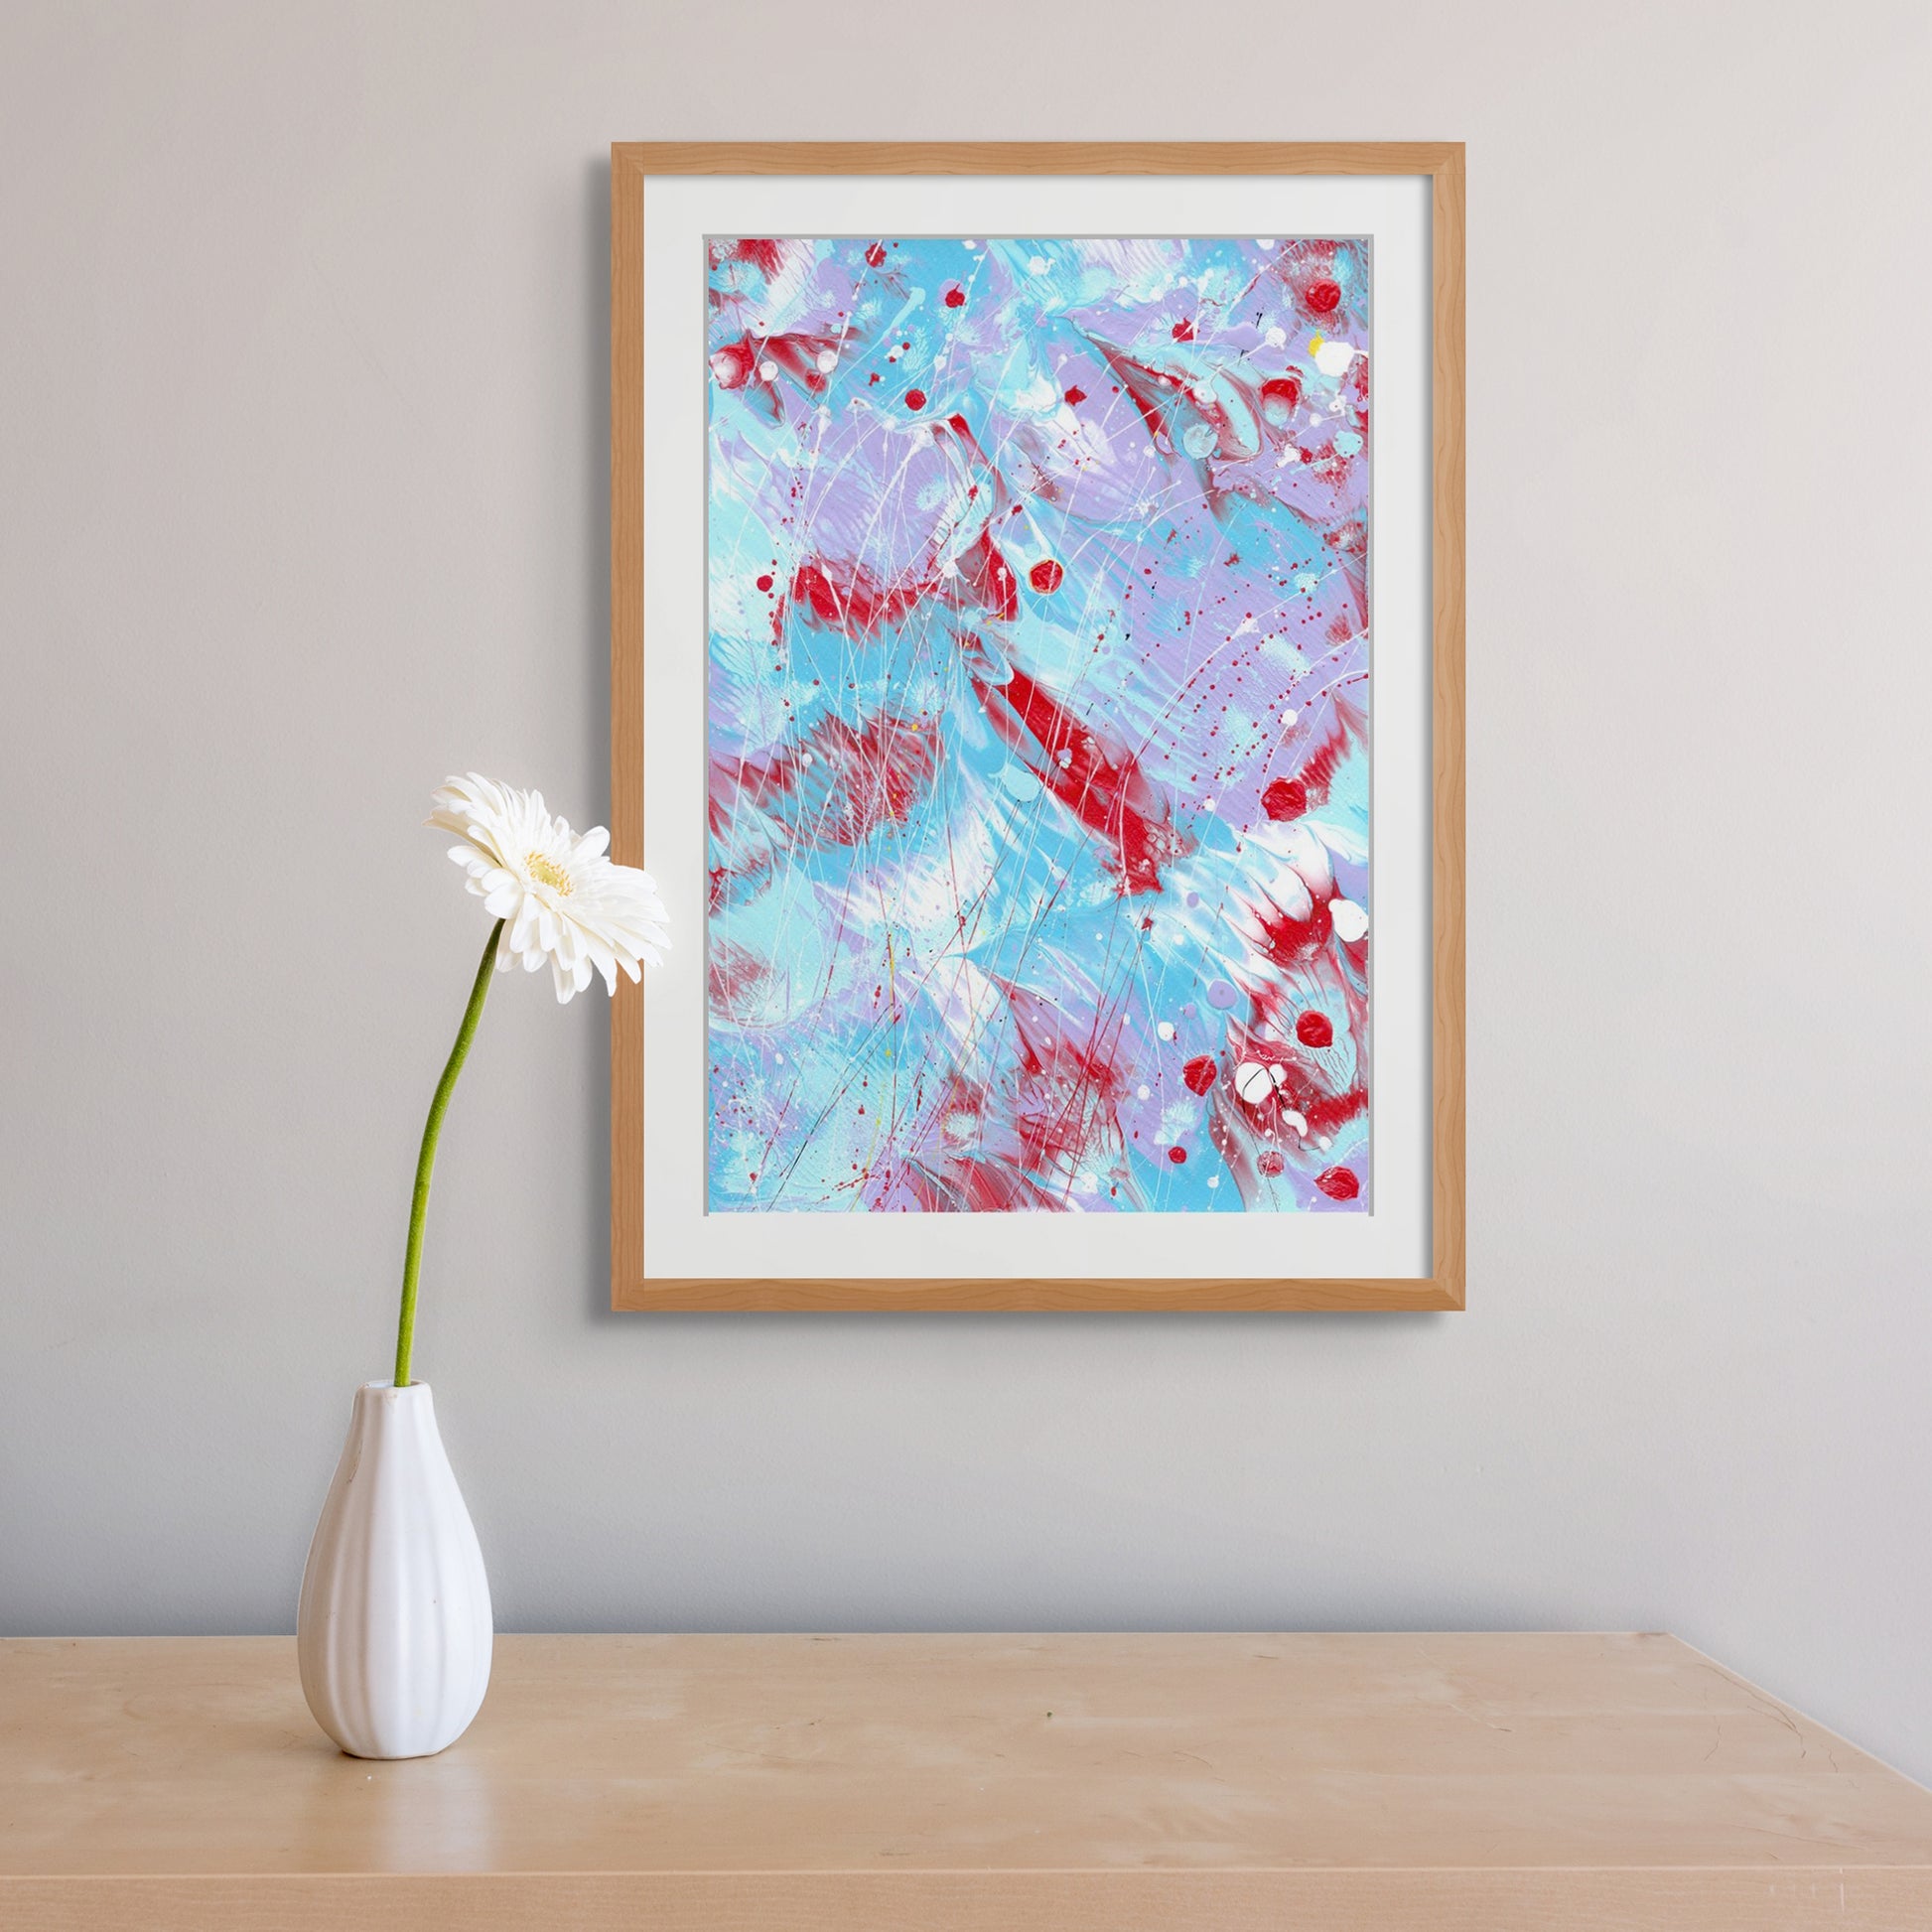 'Butterfly 6' Original Abstract on Paper . Hand painted by Bridget Bradley. Seen in Oak frame hanging near white daisy in white vase. Sold unframed approx. A3 size.